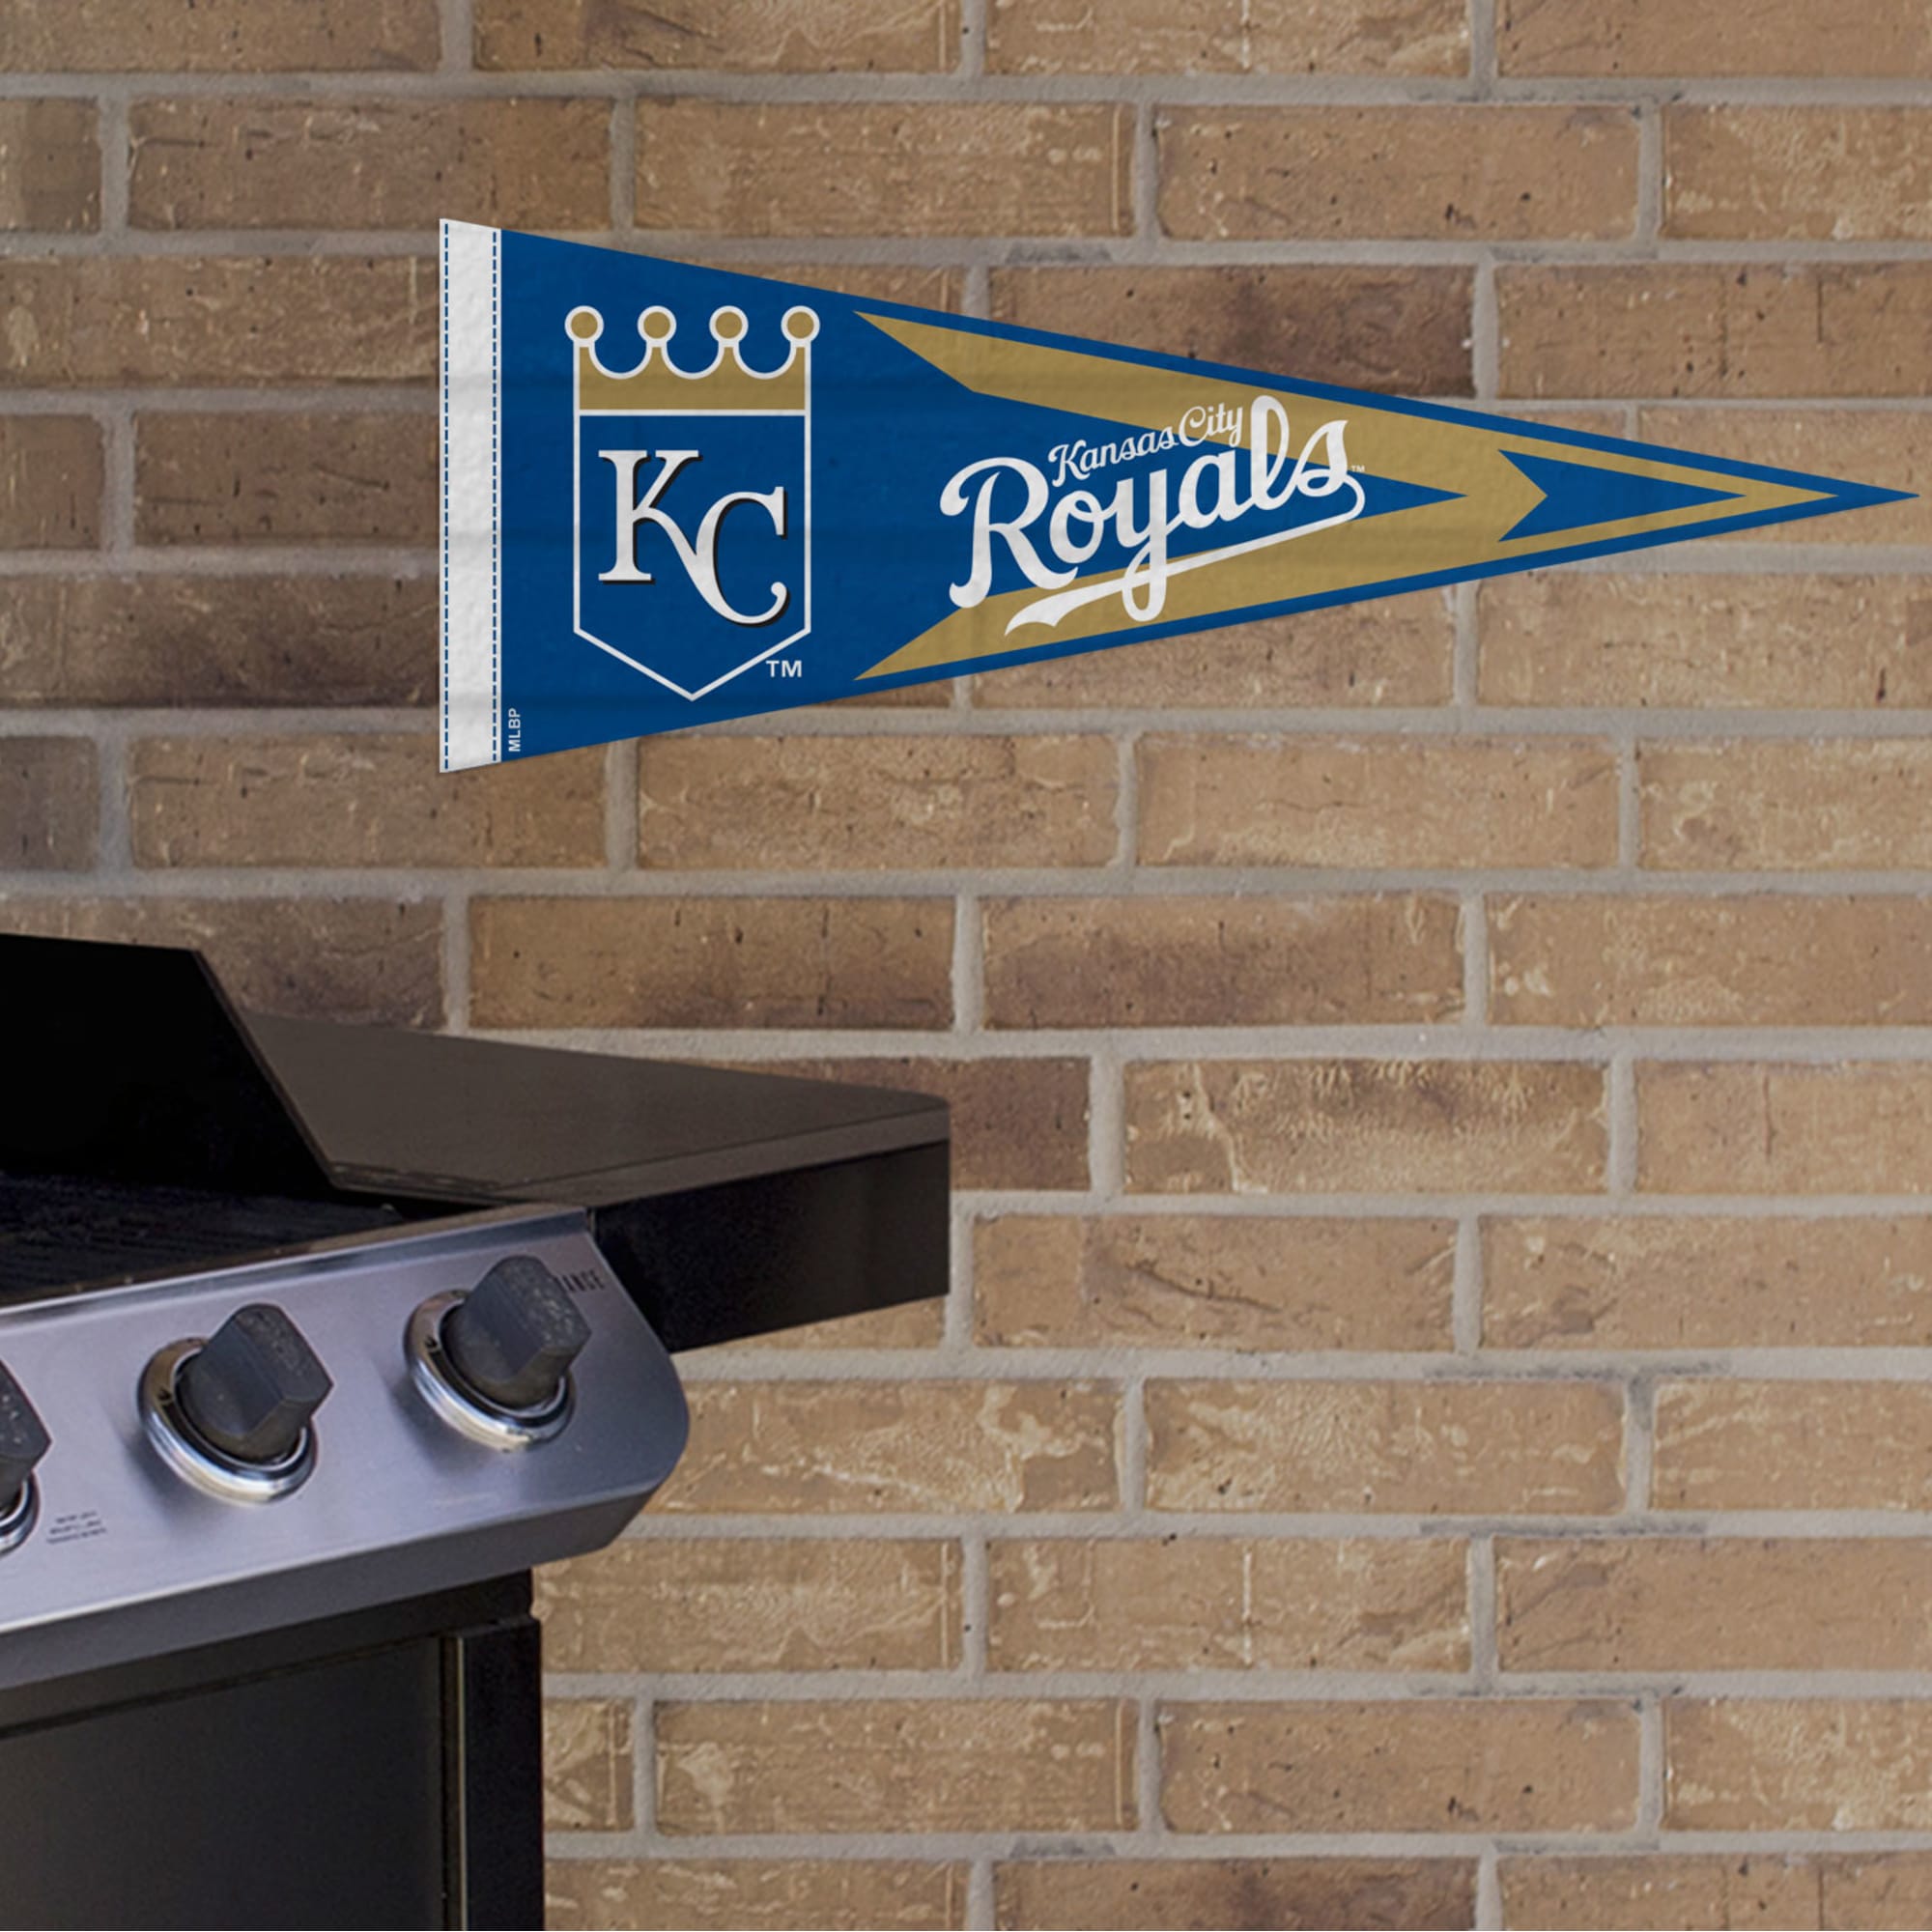 Kansas City Royals: Pennant - Officially Licensed MLB Outdoor Graphic 24.0"W x 9.0"H by Fathead | Wood/Aluminum